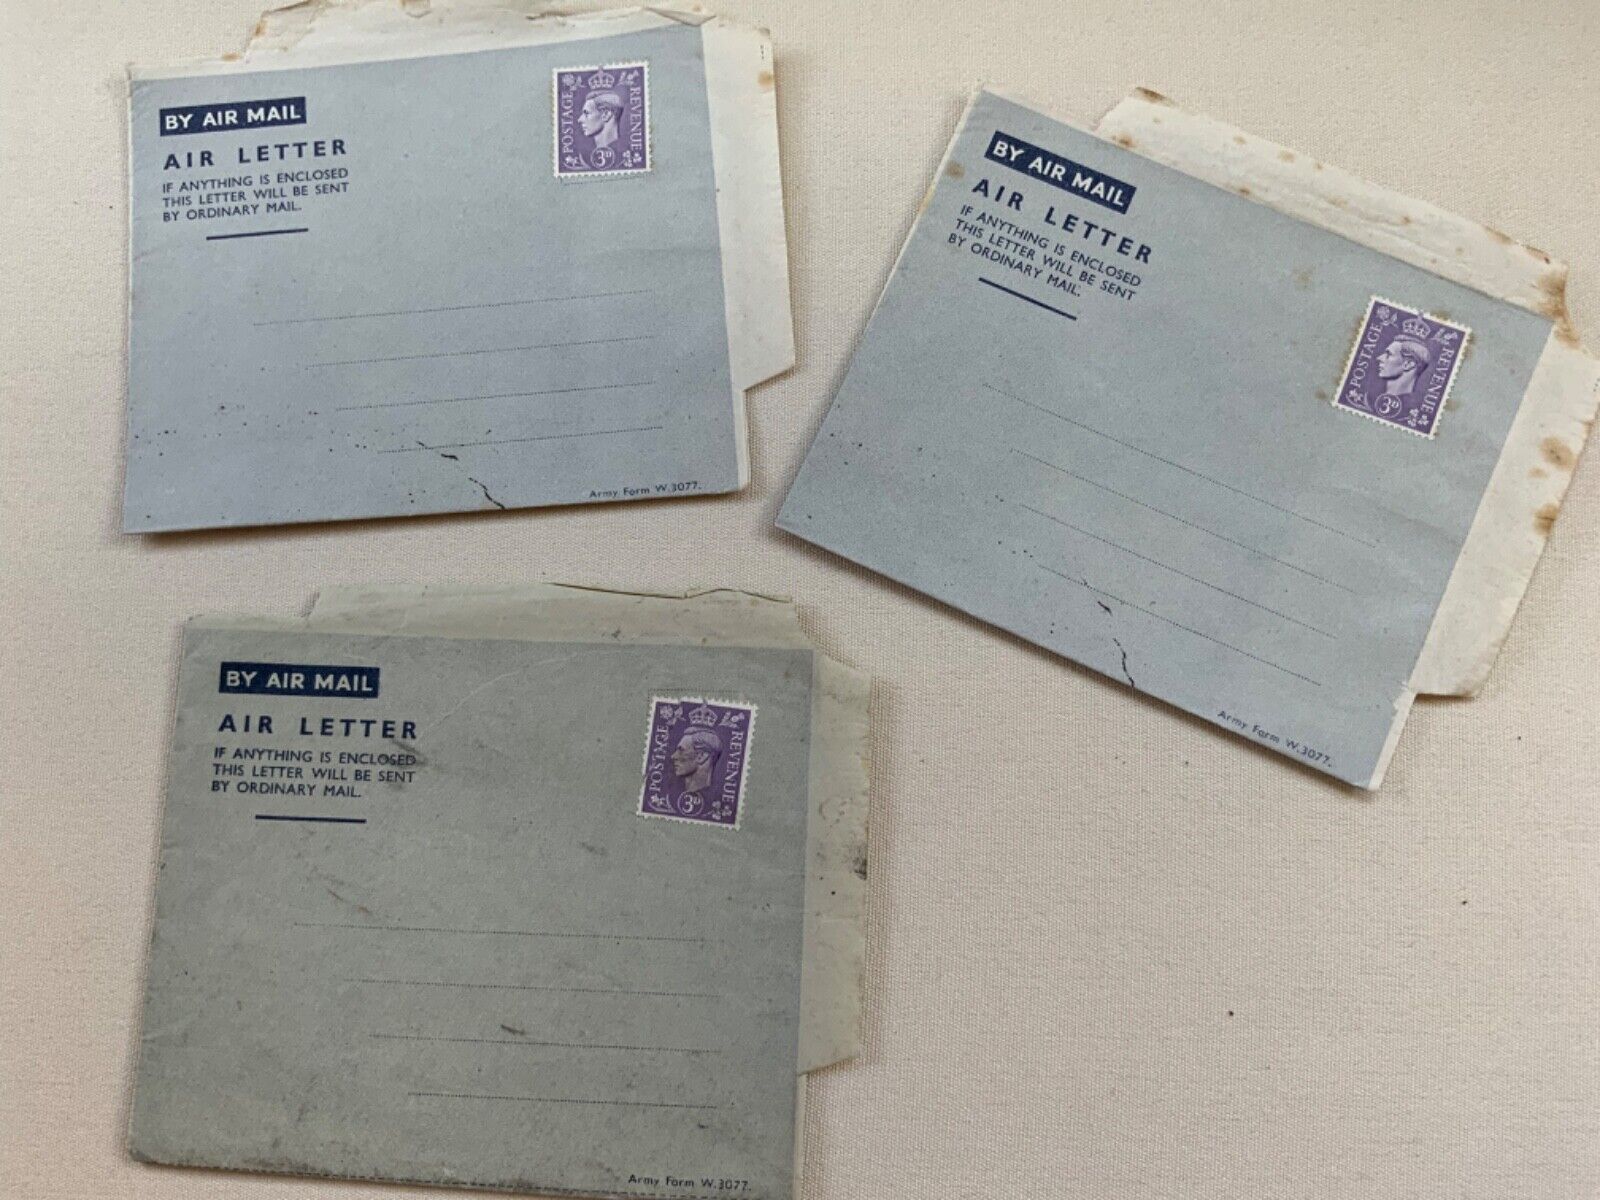 WW2 ARMY AIR MAIL LETTERS - UNUSED - KGVI LILAC 3d STAMP